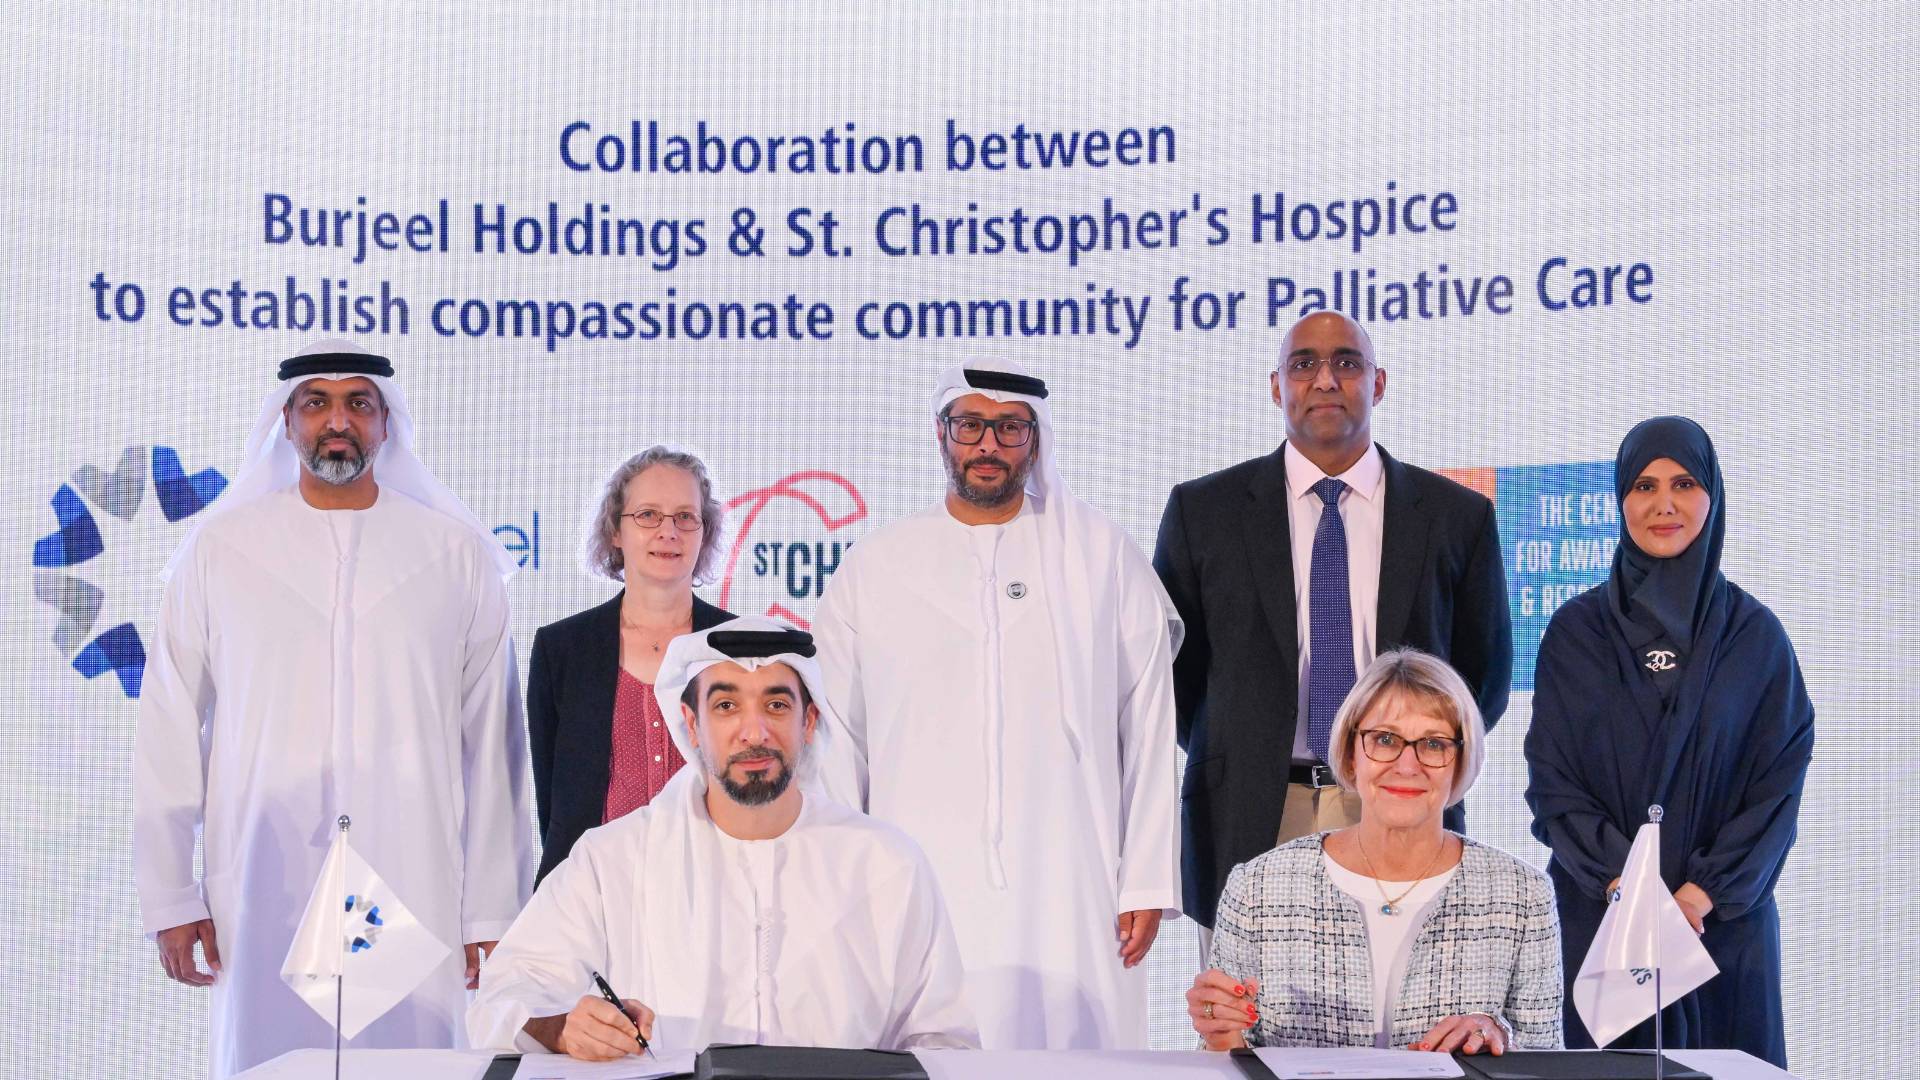 Burjeel Holdings, London’s St. Christopher’s Hospice Join Hands to Advance Palliative Care in the UAE  